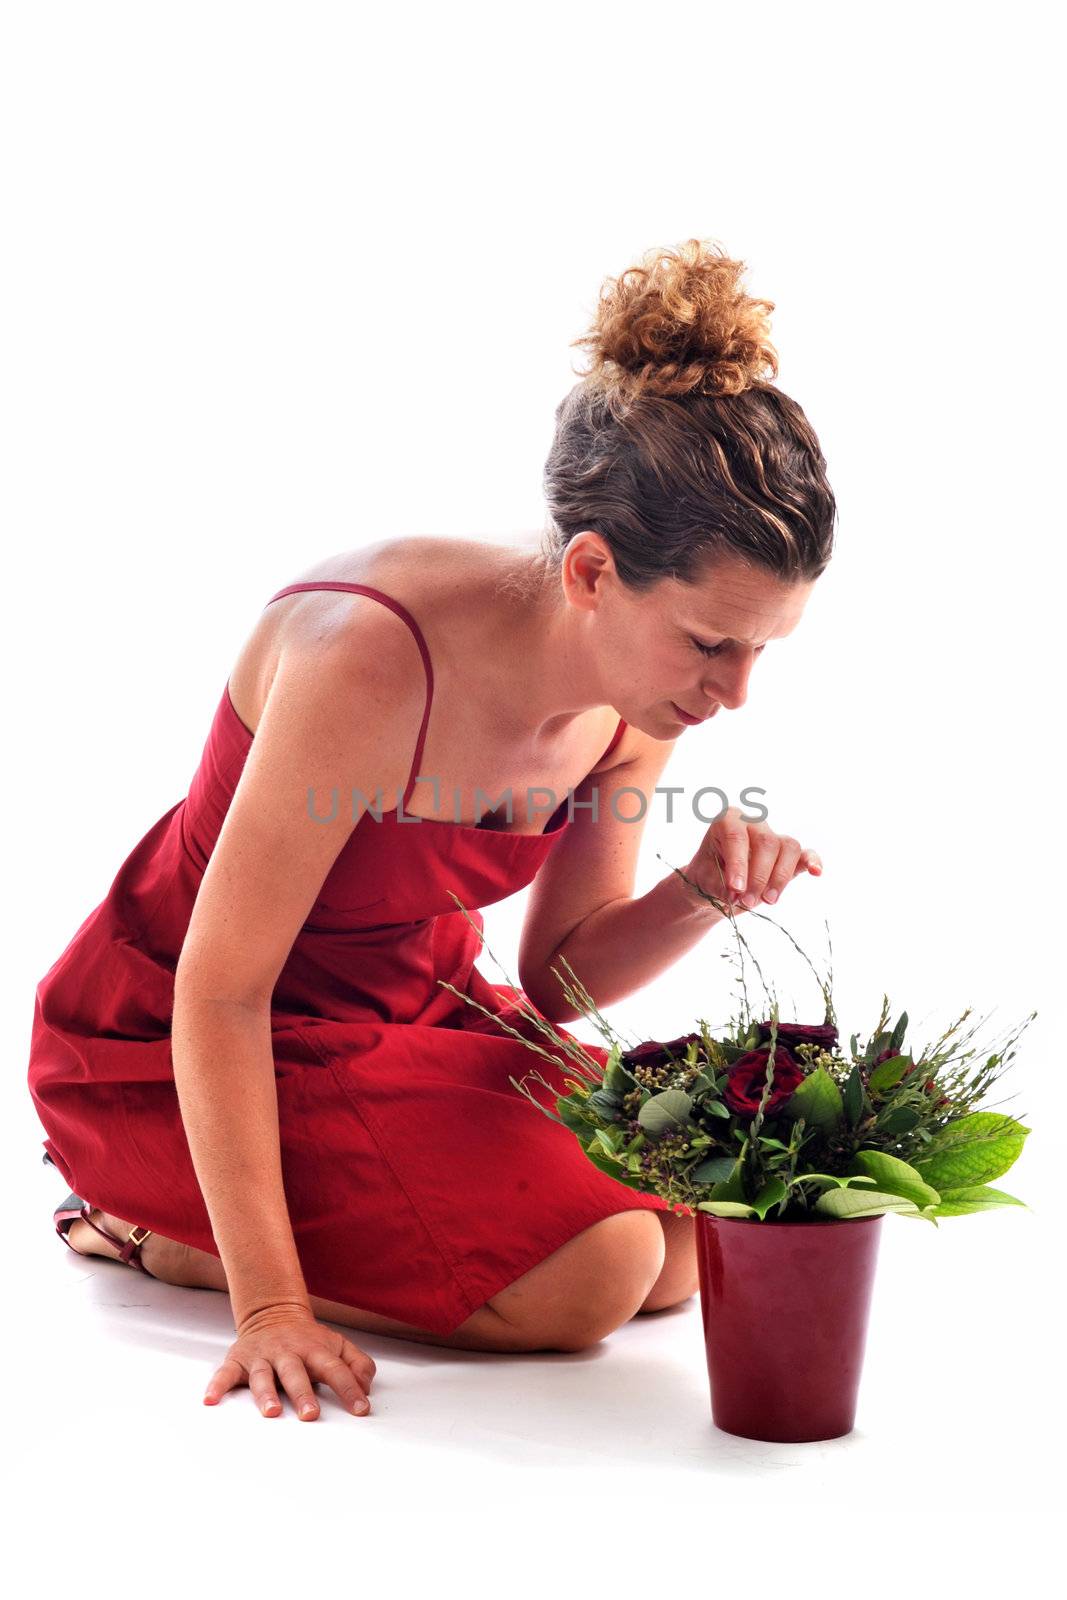 beautiful woman arranging flowers in front of a white background